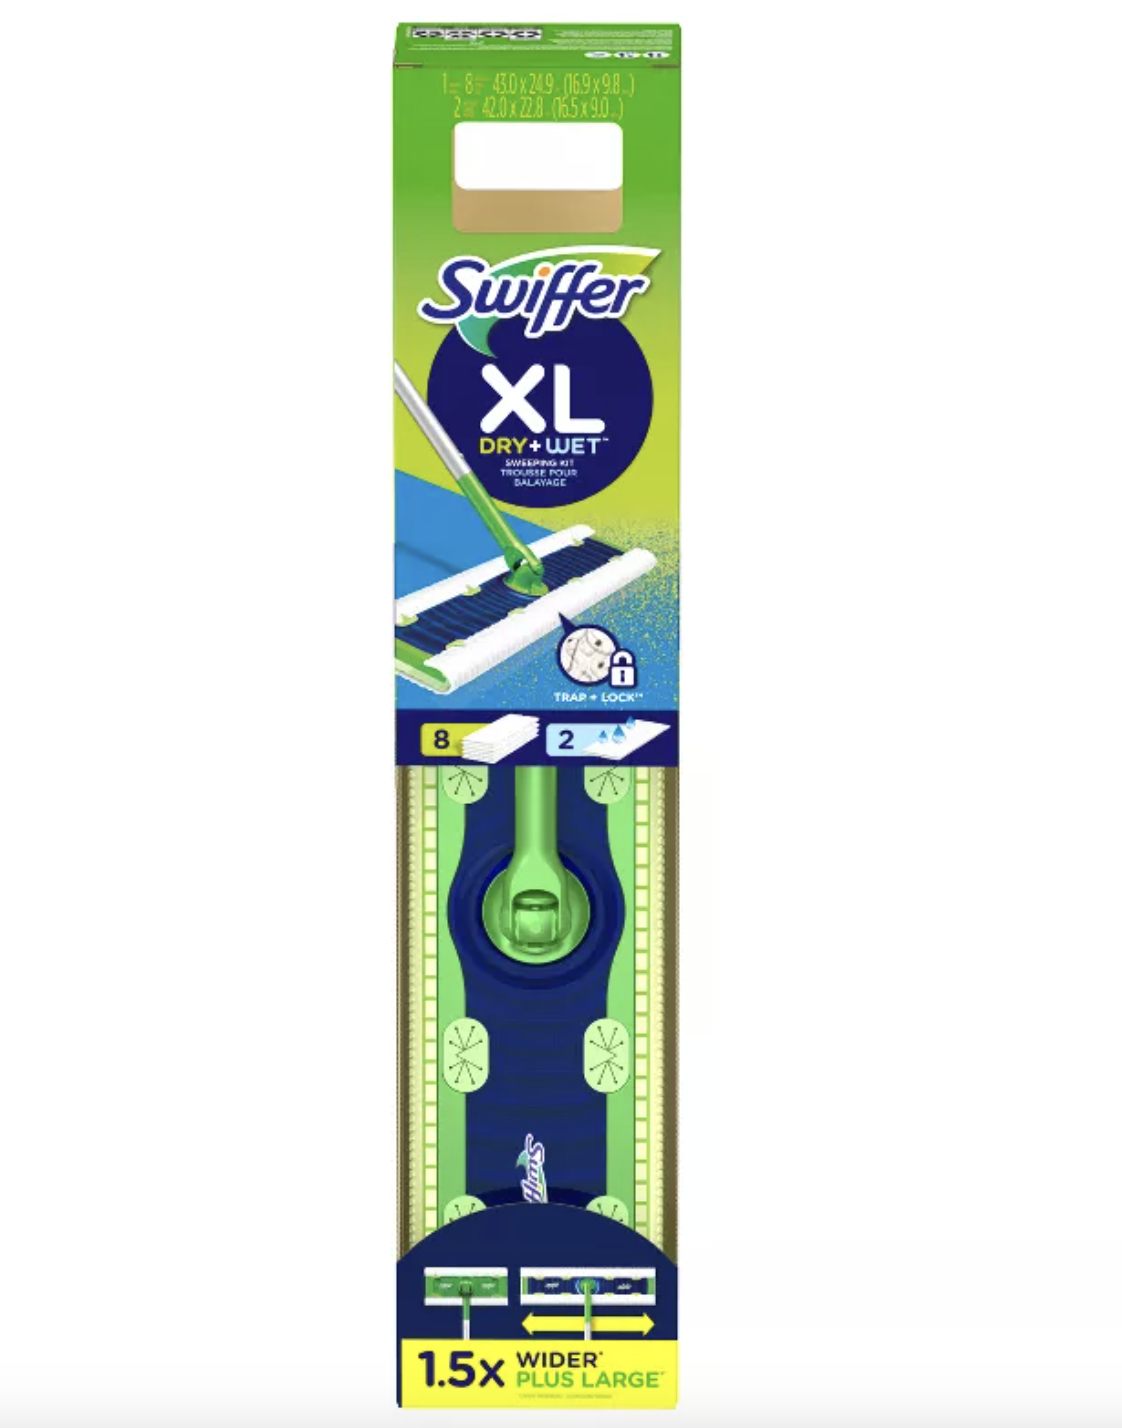 a swiffer XL in its packaging